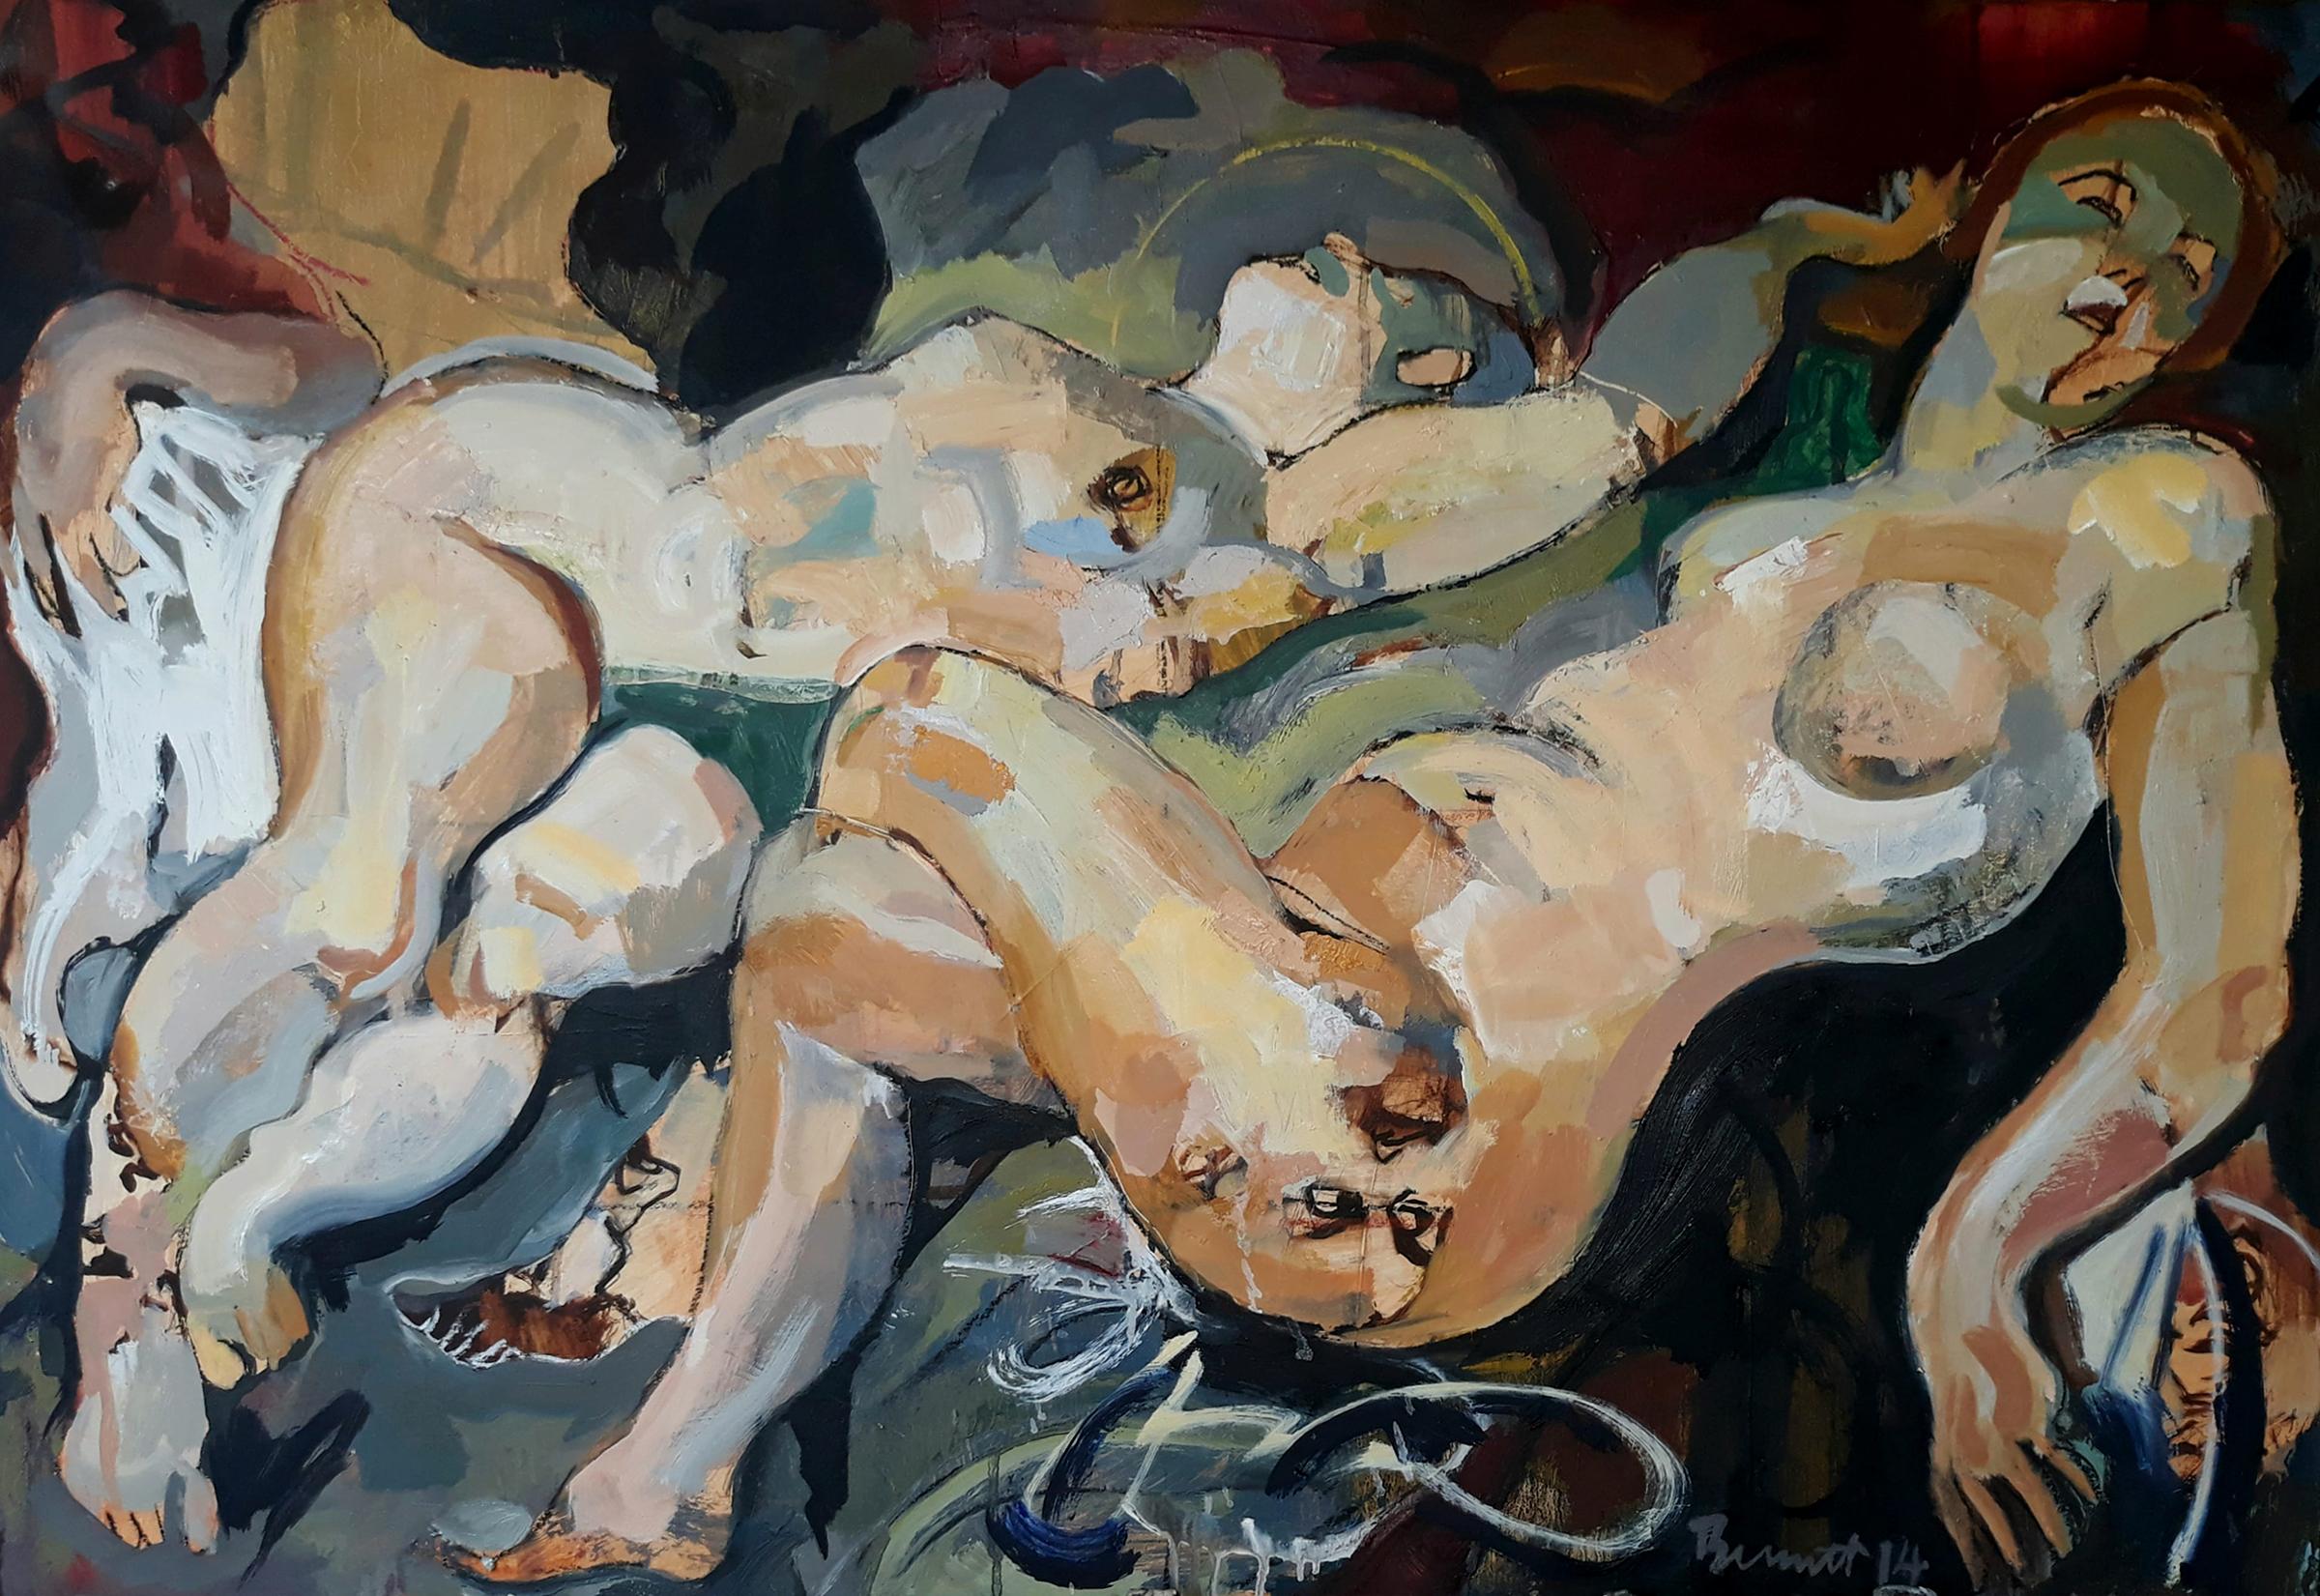 "Nymphs" two voluptuous female nudes, gestural abstracted figures, clear colors